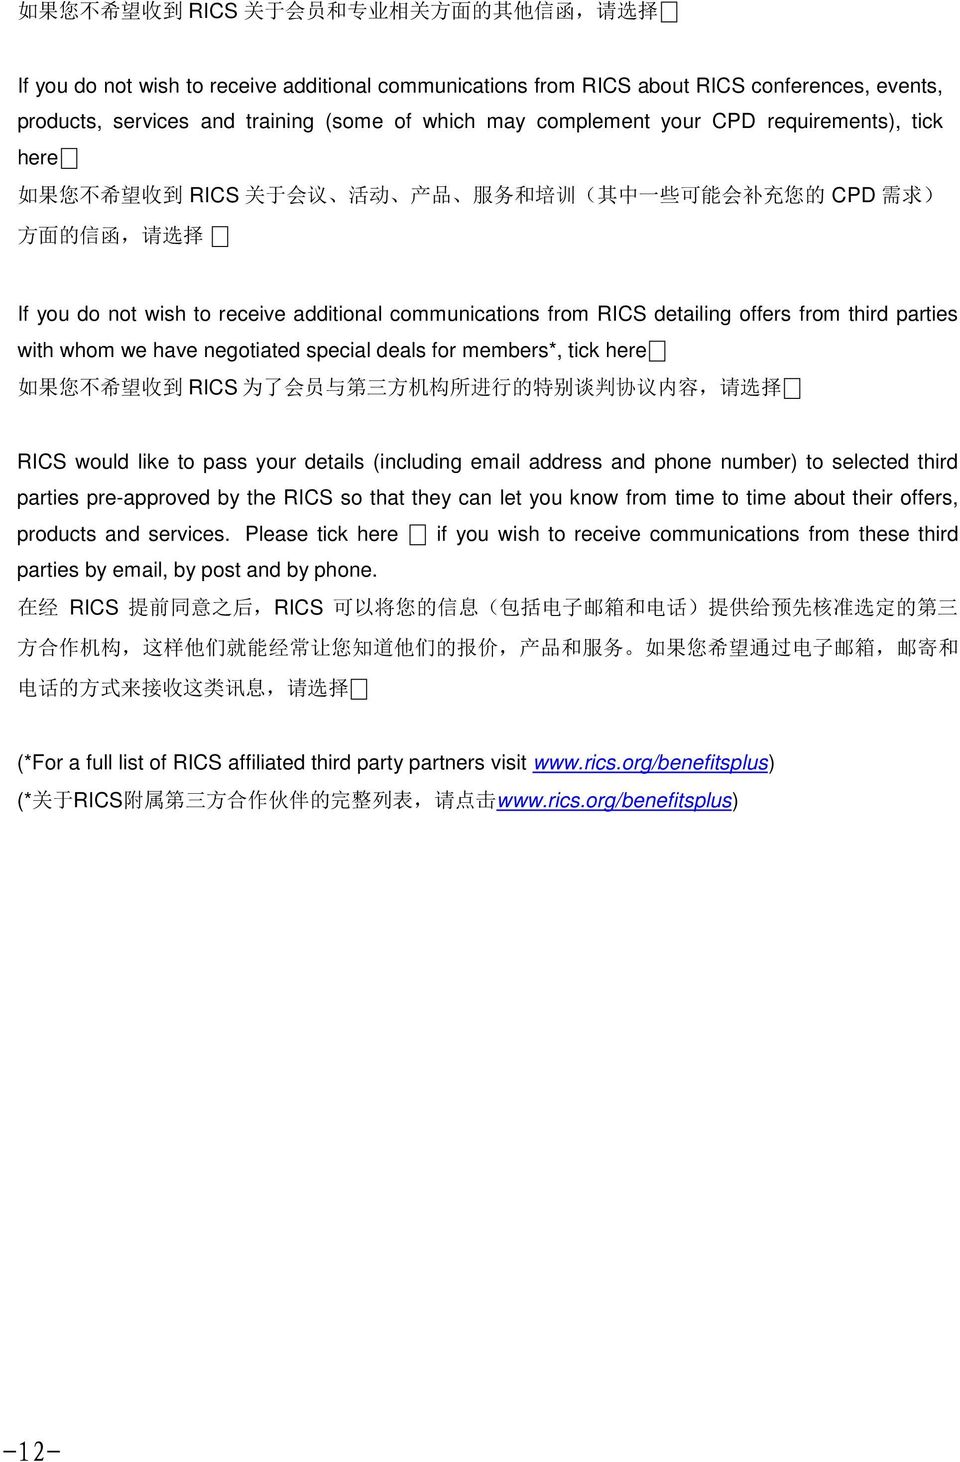 communications from RICS detailing offers from third parties with whom we have negotiated special deals for members*, tick here 如 果 您 不 希 望 收 到 RICS 为 了 会 员 与 第 三 方 机 构 所 进 行 的 特 别 谈 判 协 议 内 容, 请 选 择